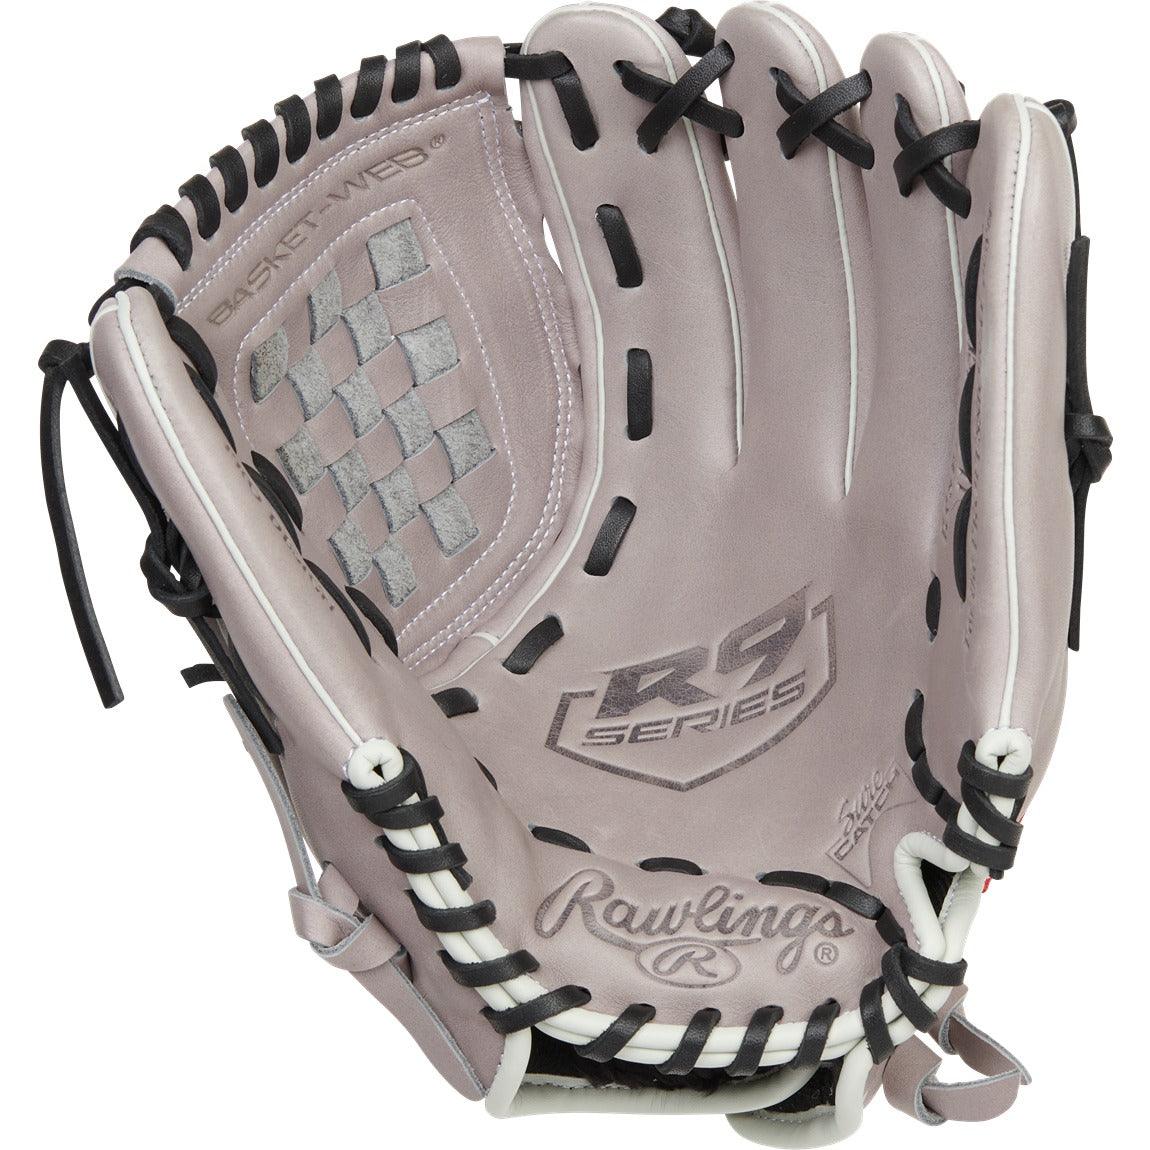 R9 11.5" Softball Glove - Youth - Sports Excellence